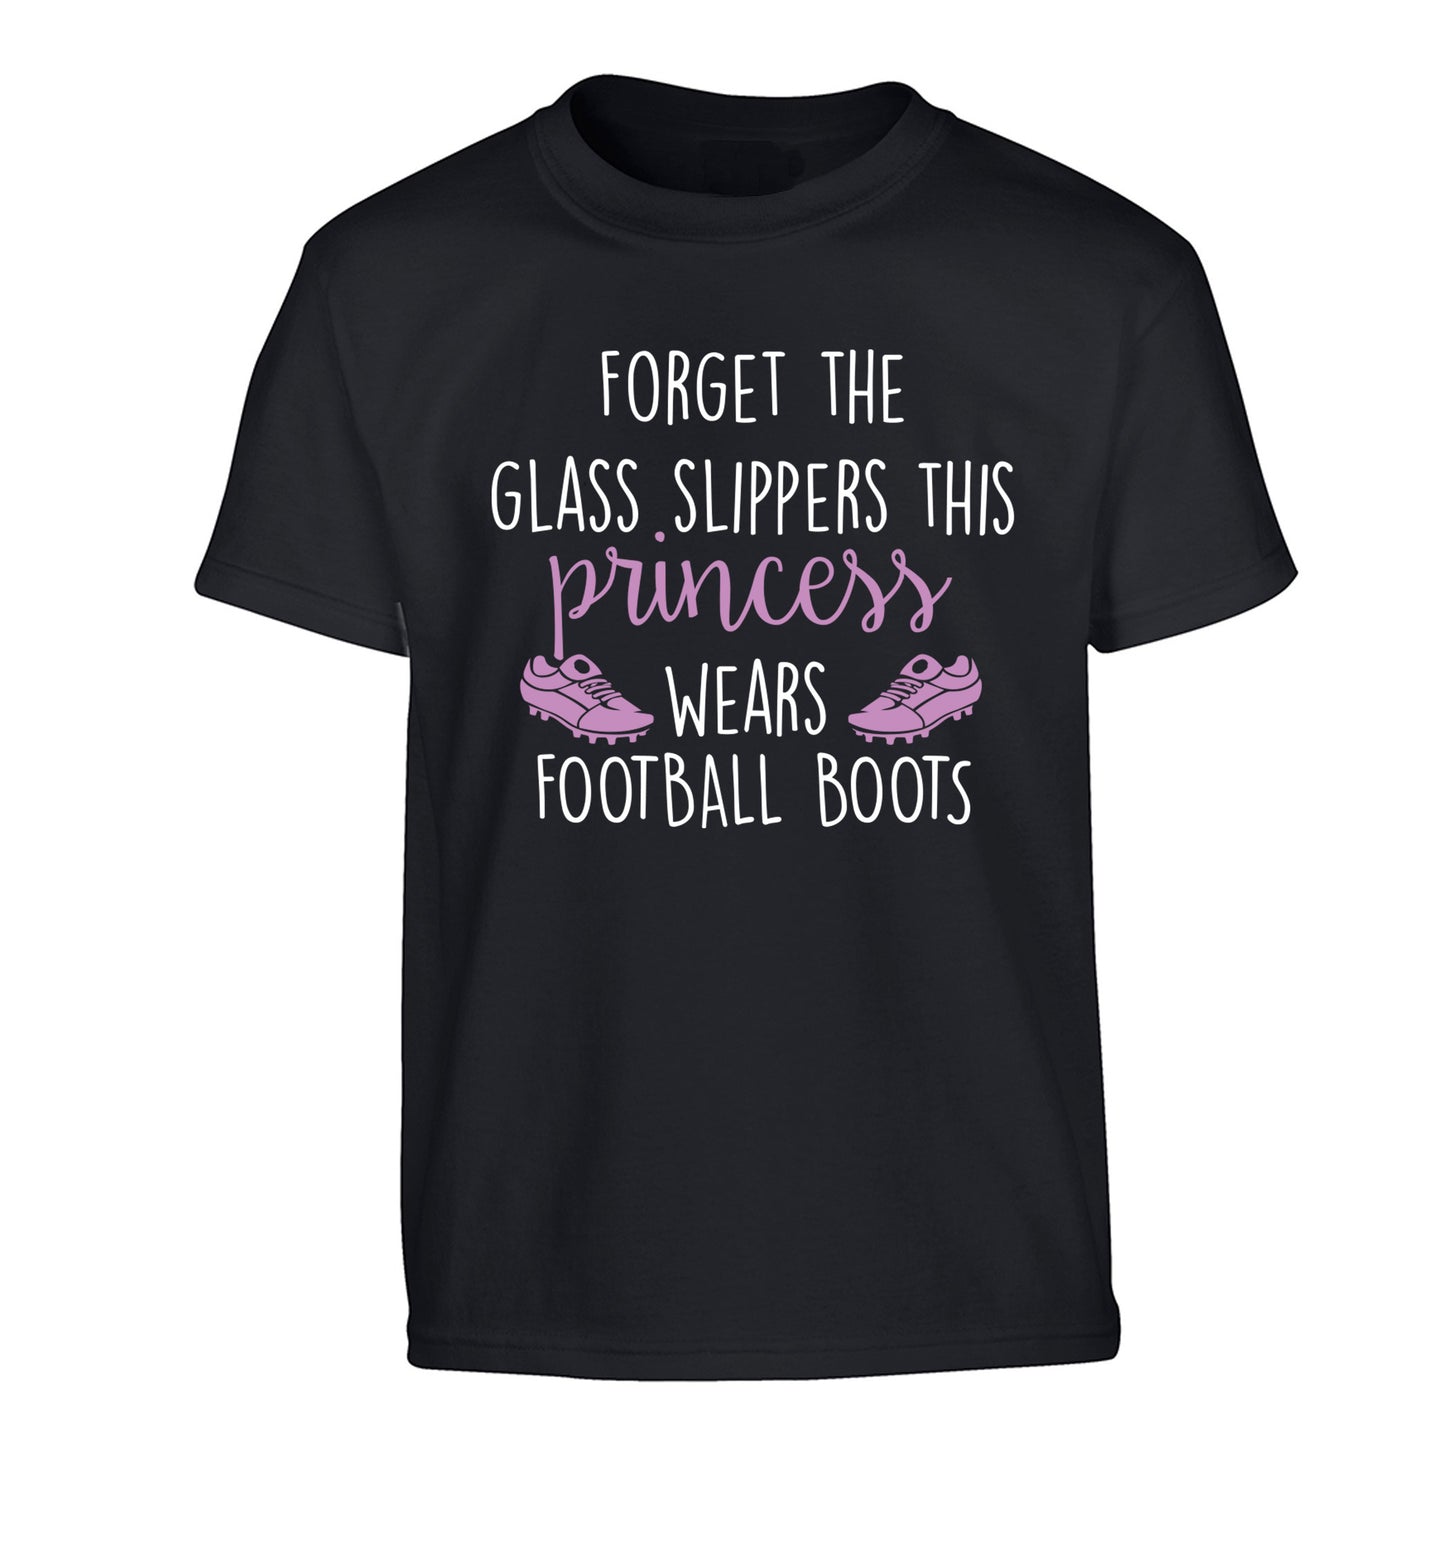 Forget the glass slippers this princess wears football boots Children's black Tshirt 12-14 Years